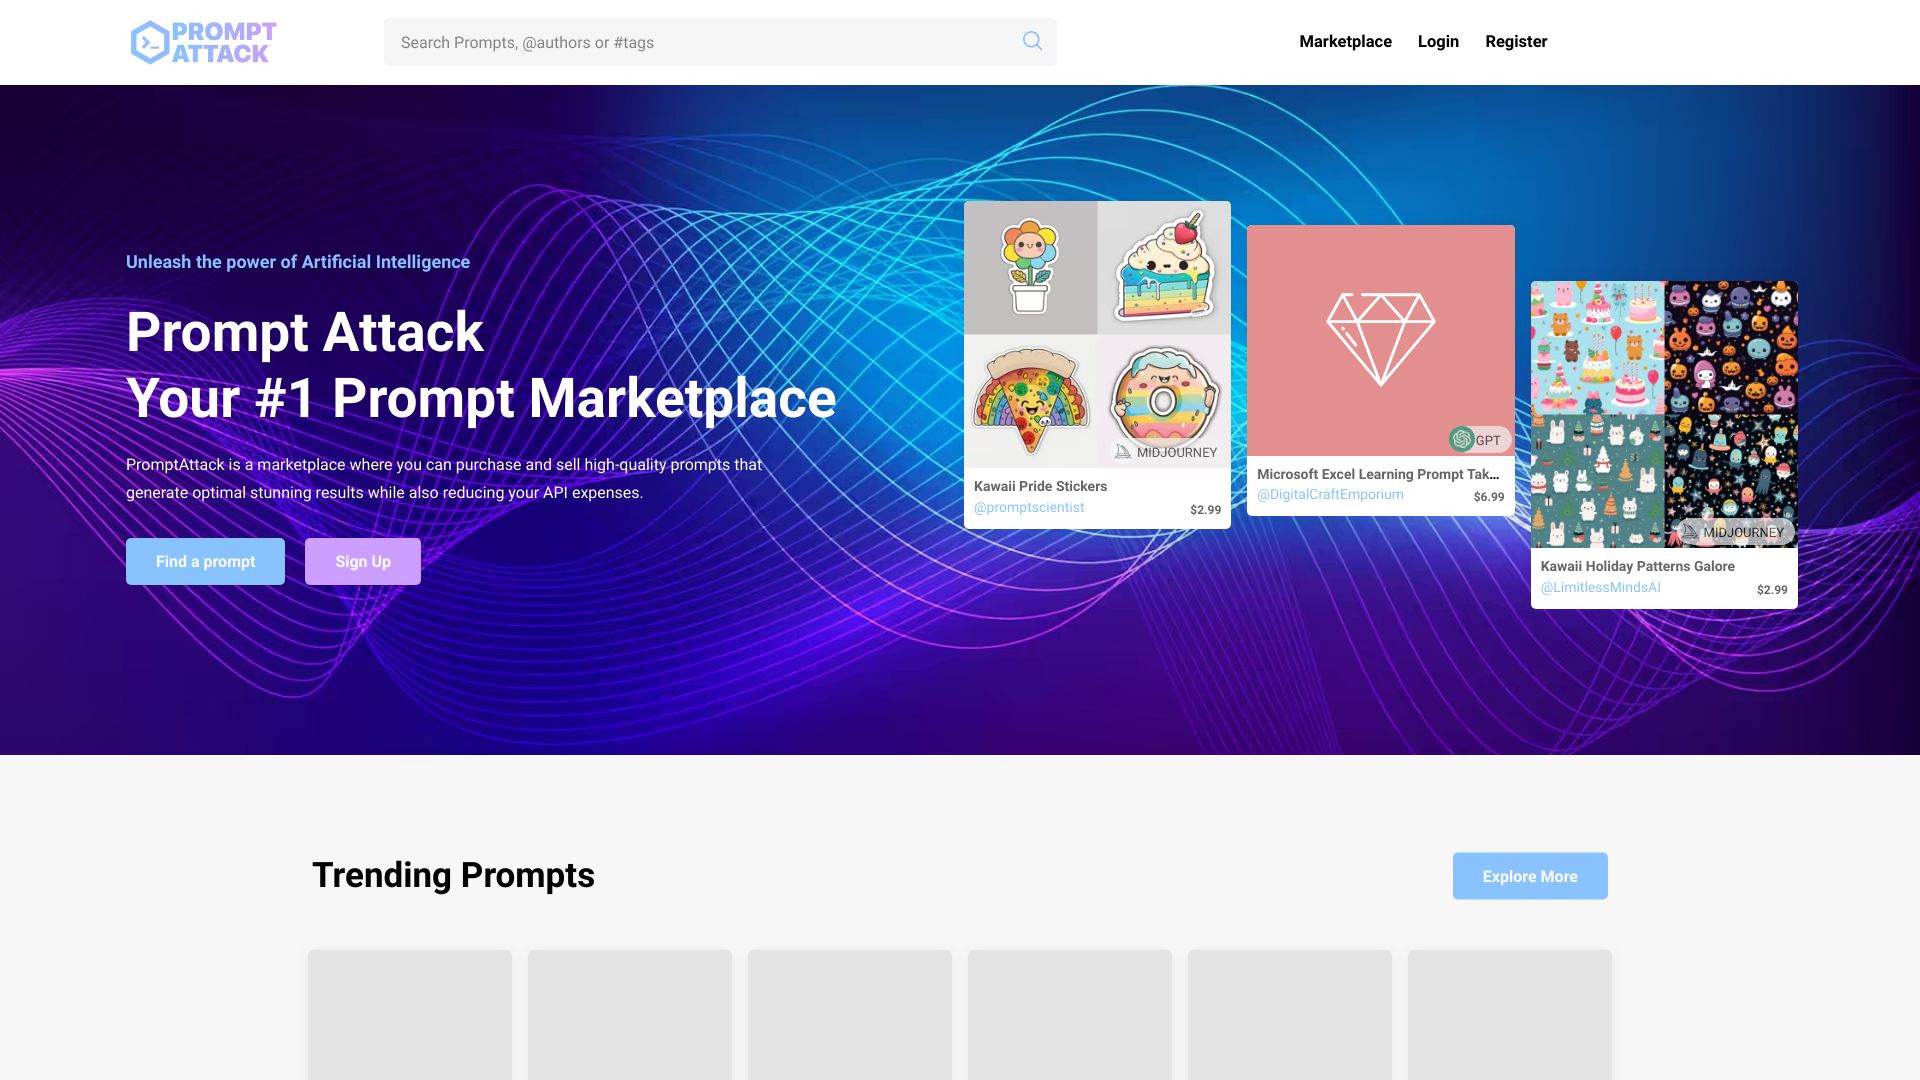 Prompt Attack - Your #1 Prompt Marketplace